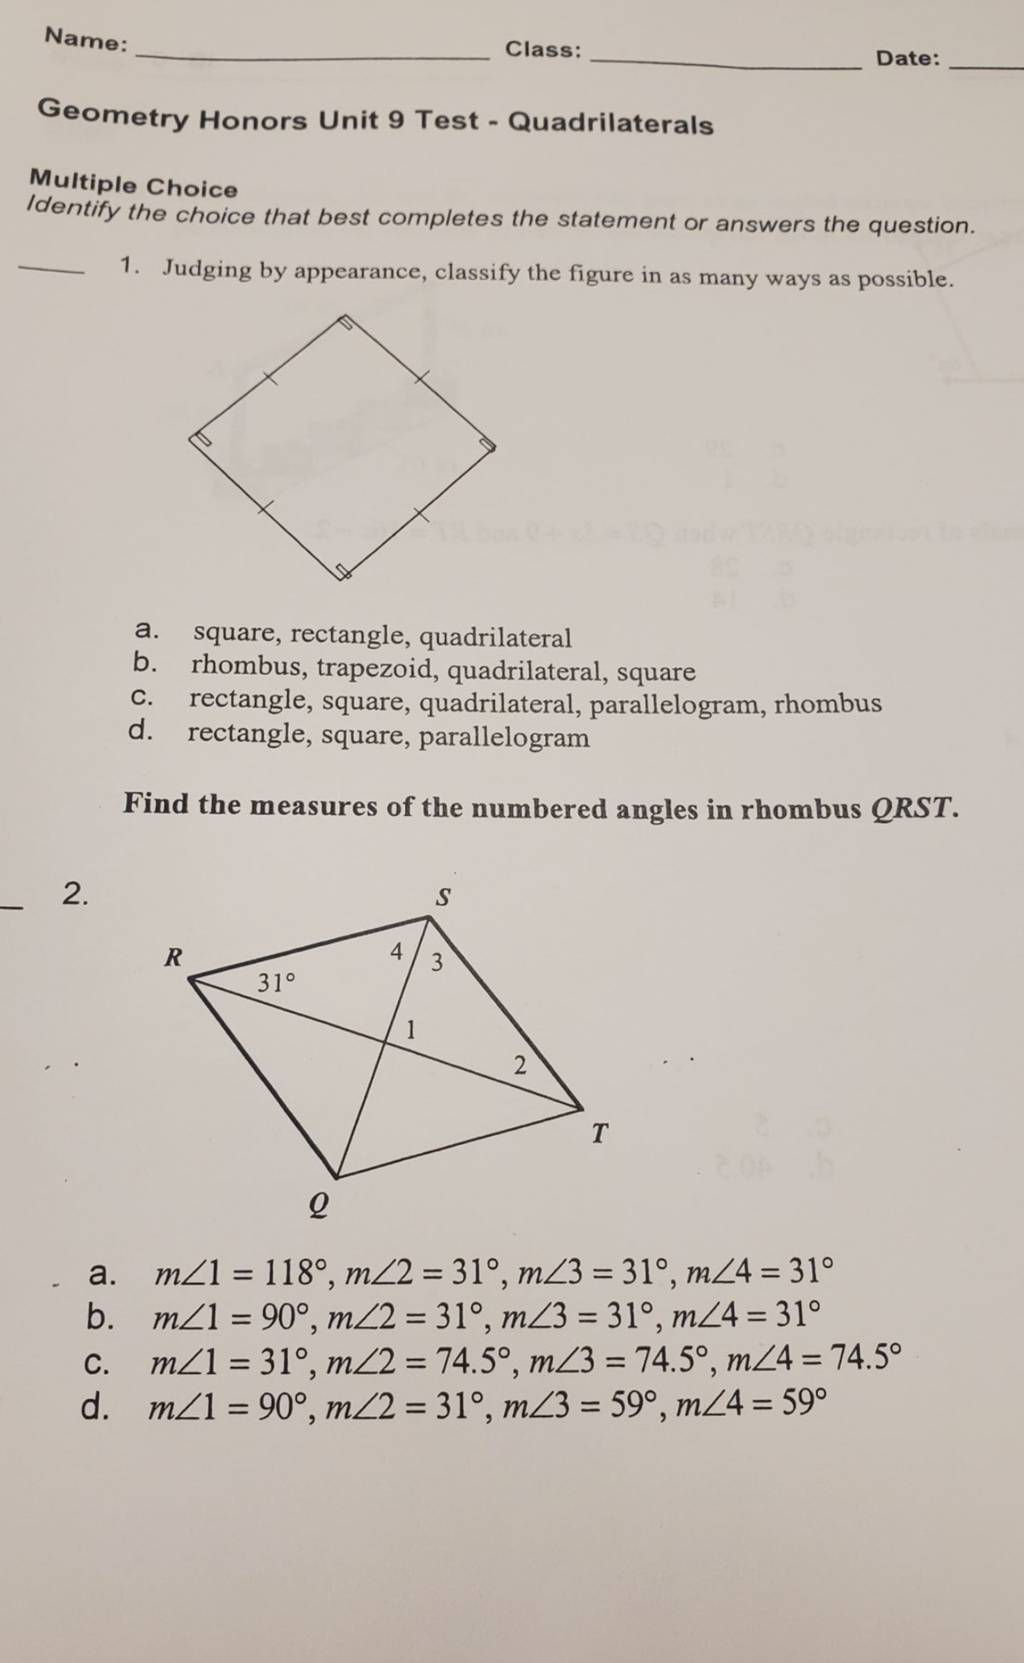 Name: Class: Date: Geometry Honors Unit 9 Test - Quadrilaterals Multip